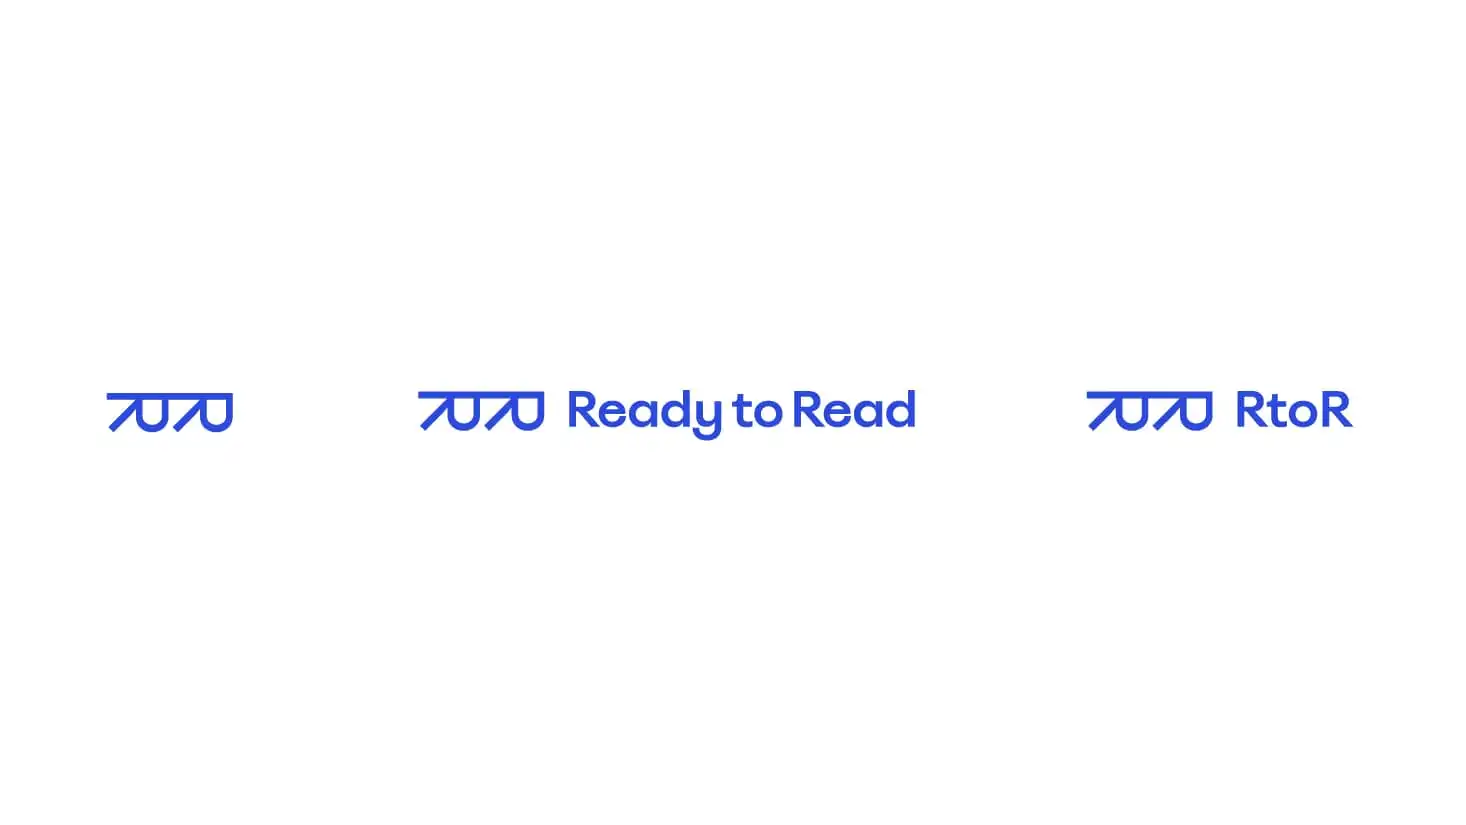 all the different version of Ready to Read's logo